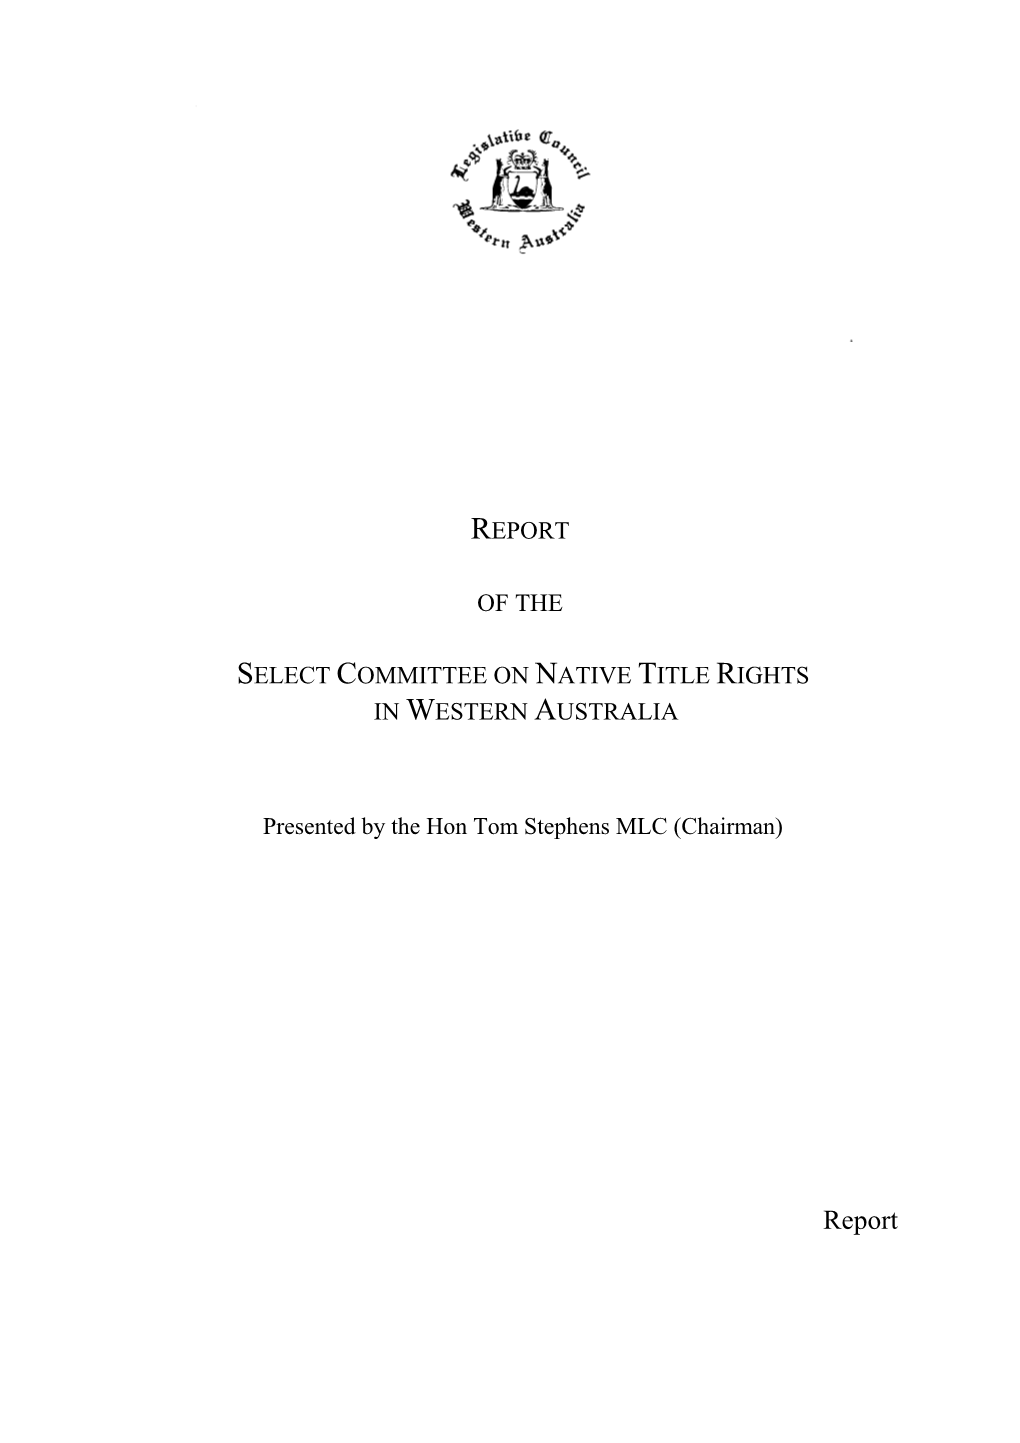 Report of the Select Committee on Native Title Rights in Western Australia